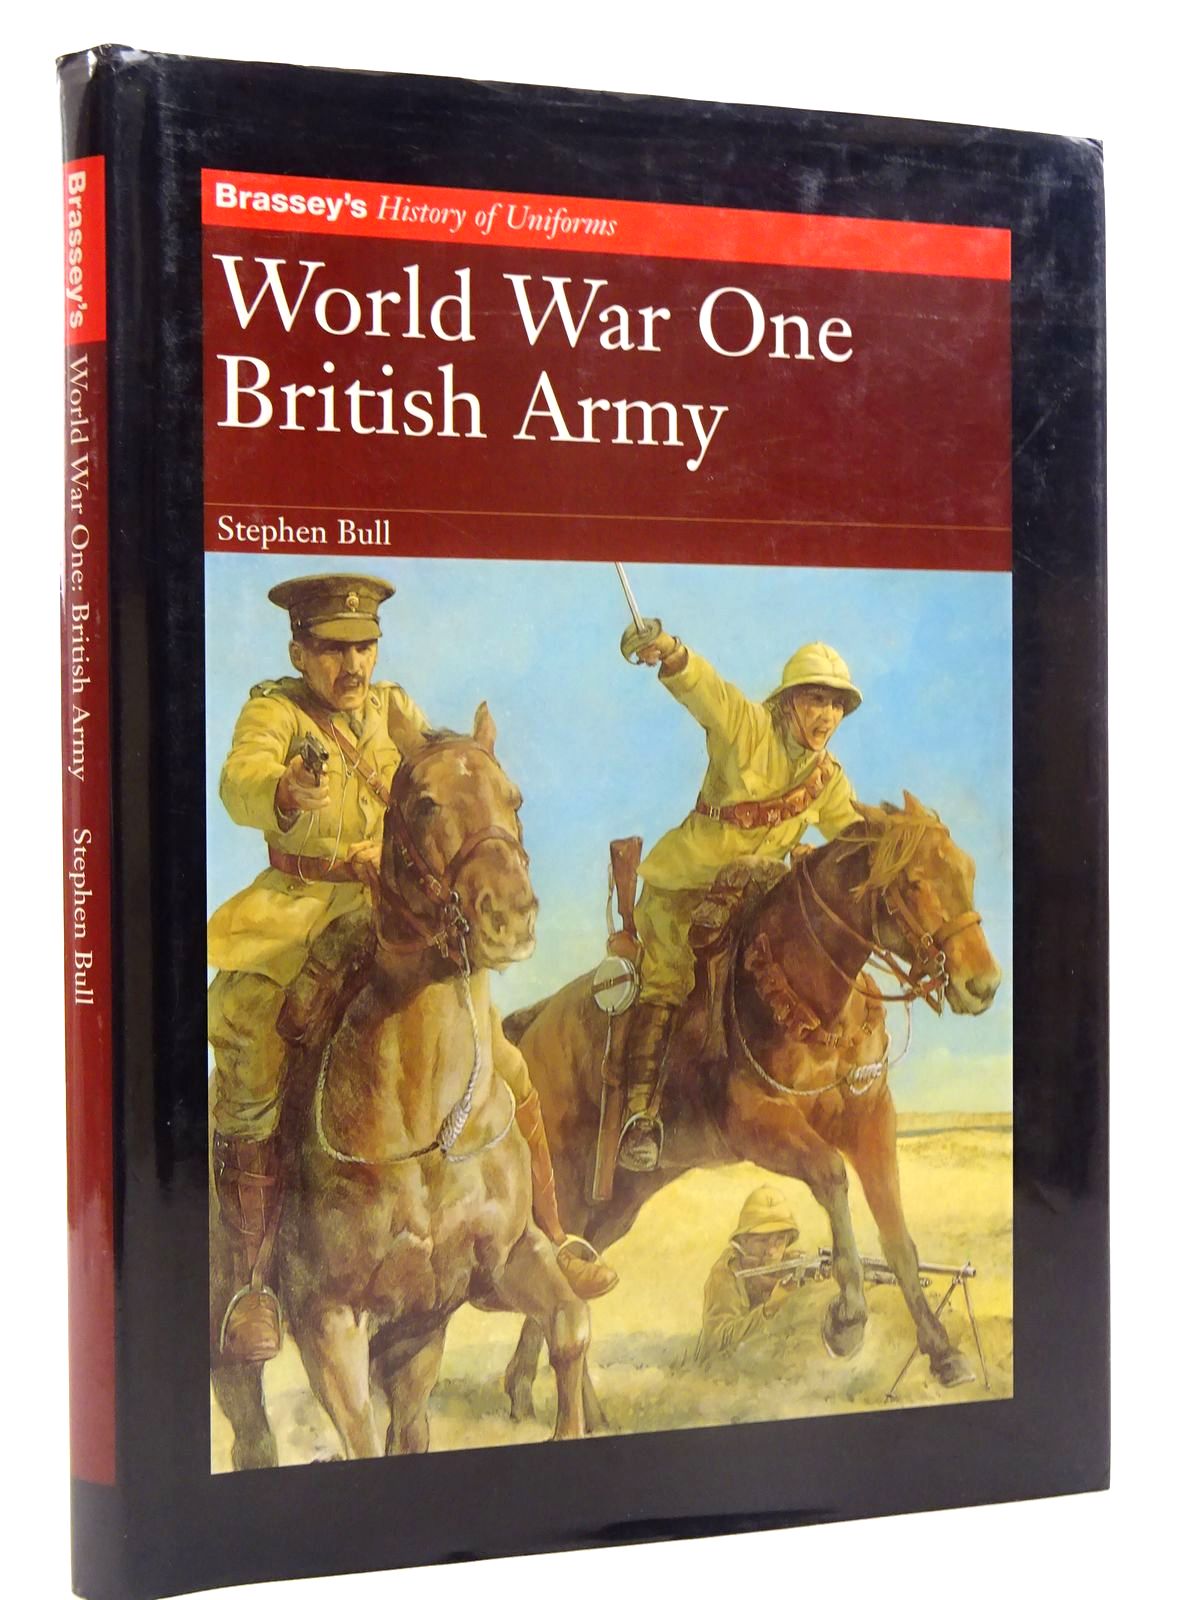 Photo of WORLD WAR ONE BRITISH ARMY written by Bull, Stephen illustrated by Hook, Christa published by Brassey's (STOCK CODE: 2125747)  for sale by Stella & Rose's Books